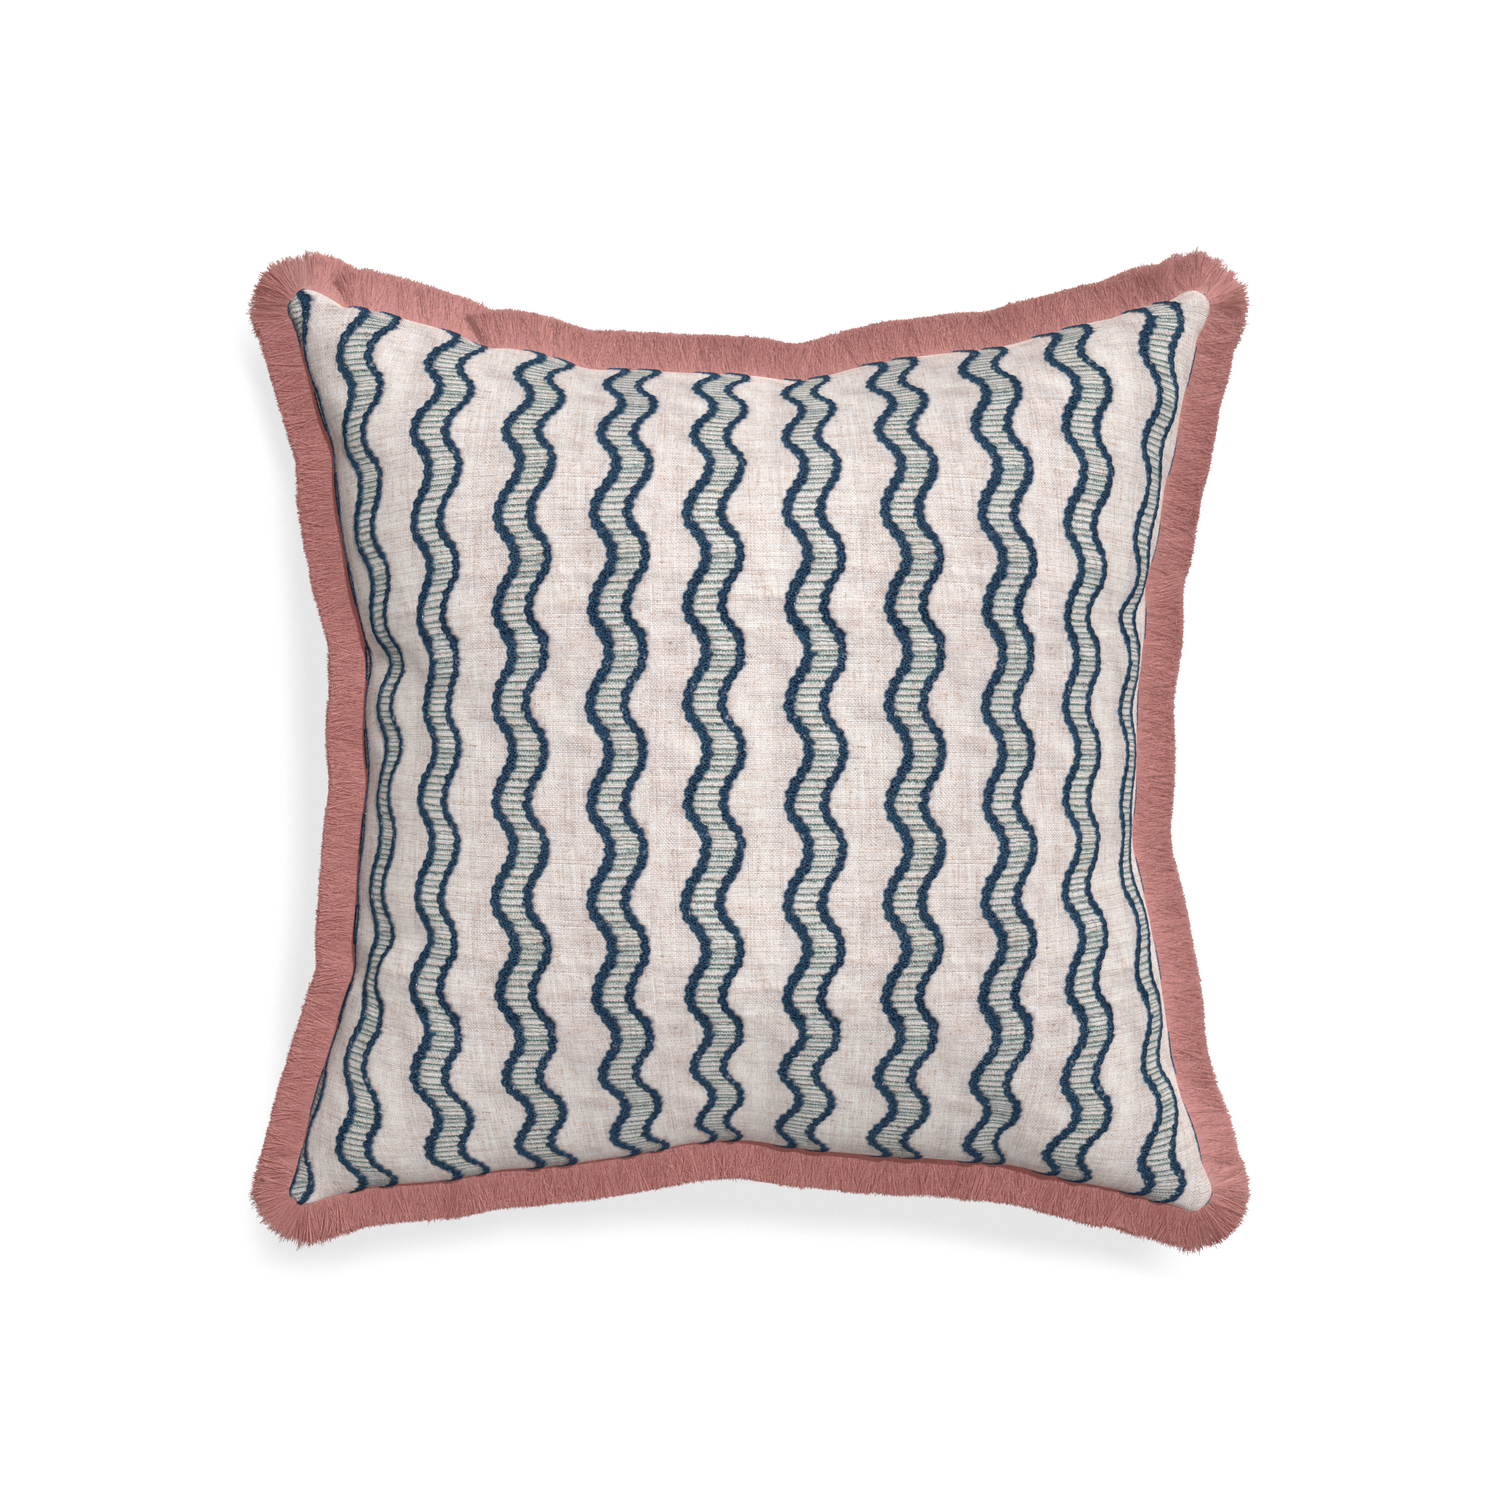 20-square beatrice custom embroidered wavepillow with d fringe on white background